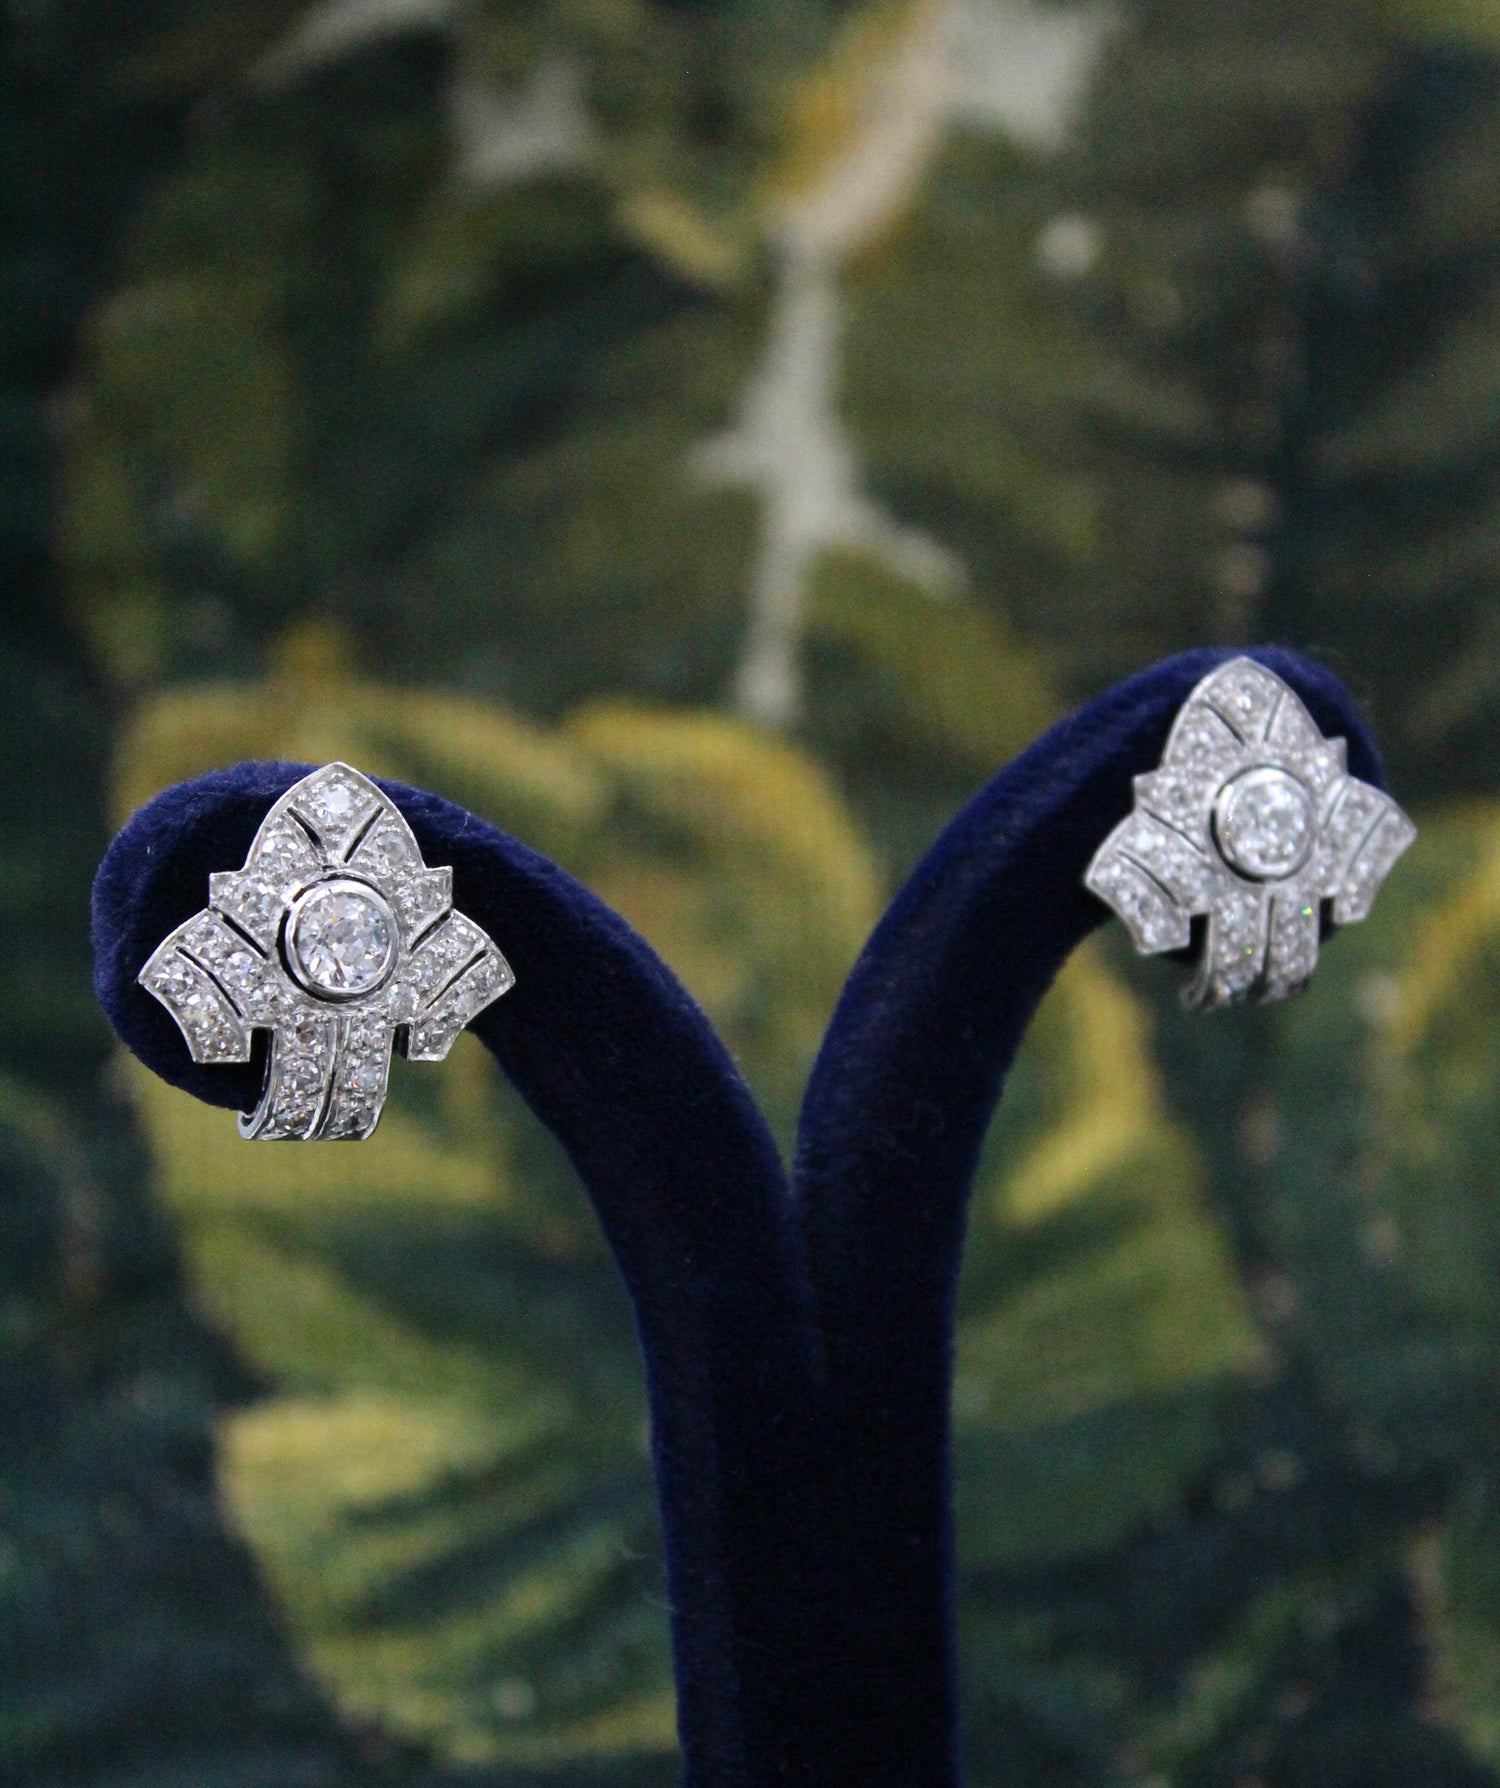 An exceptional pair of Platinum and 18 Carat White Gold Diamond Earrings, set with two Round Brilliant Cut Diamonds and Forty Six Round Brilliant Cut Natural Diamonds on the sides. - Robin Haydock Antiques